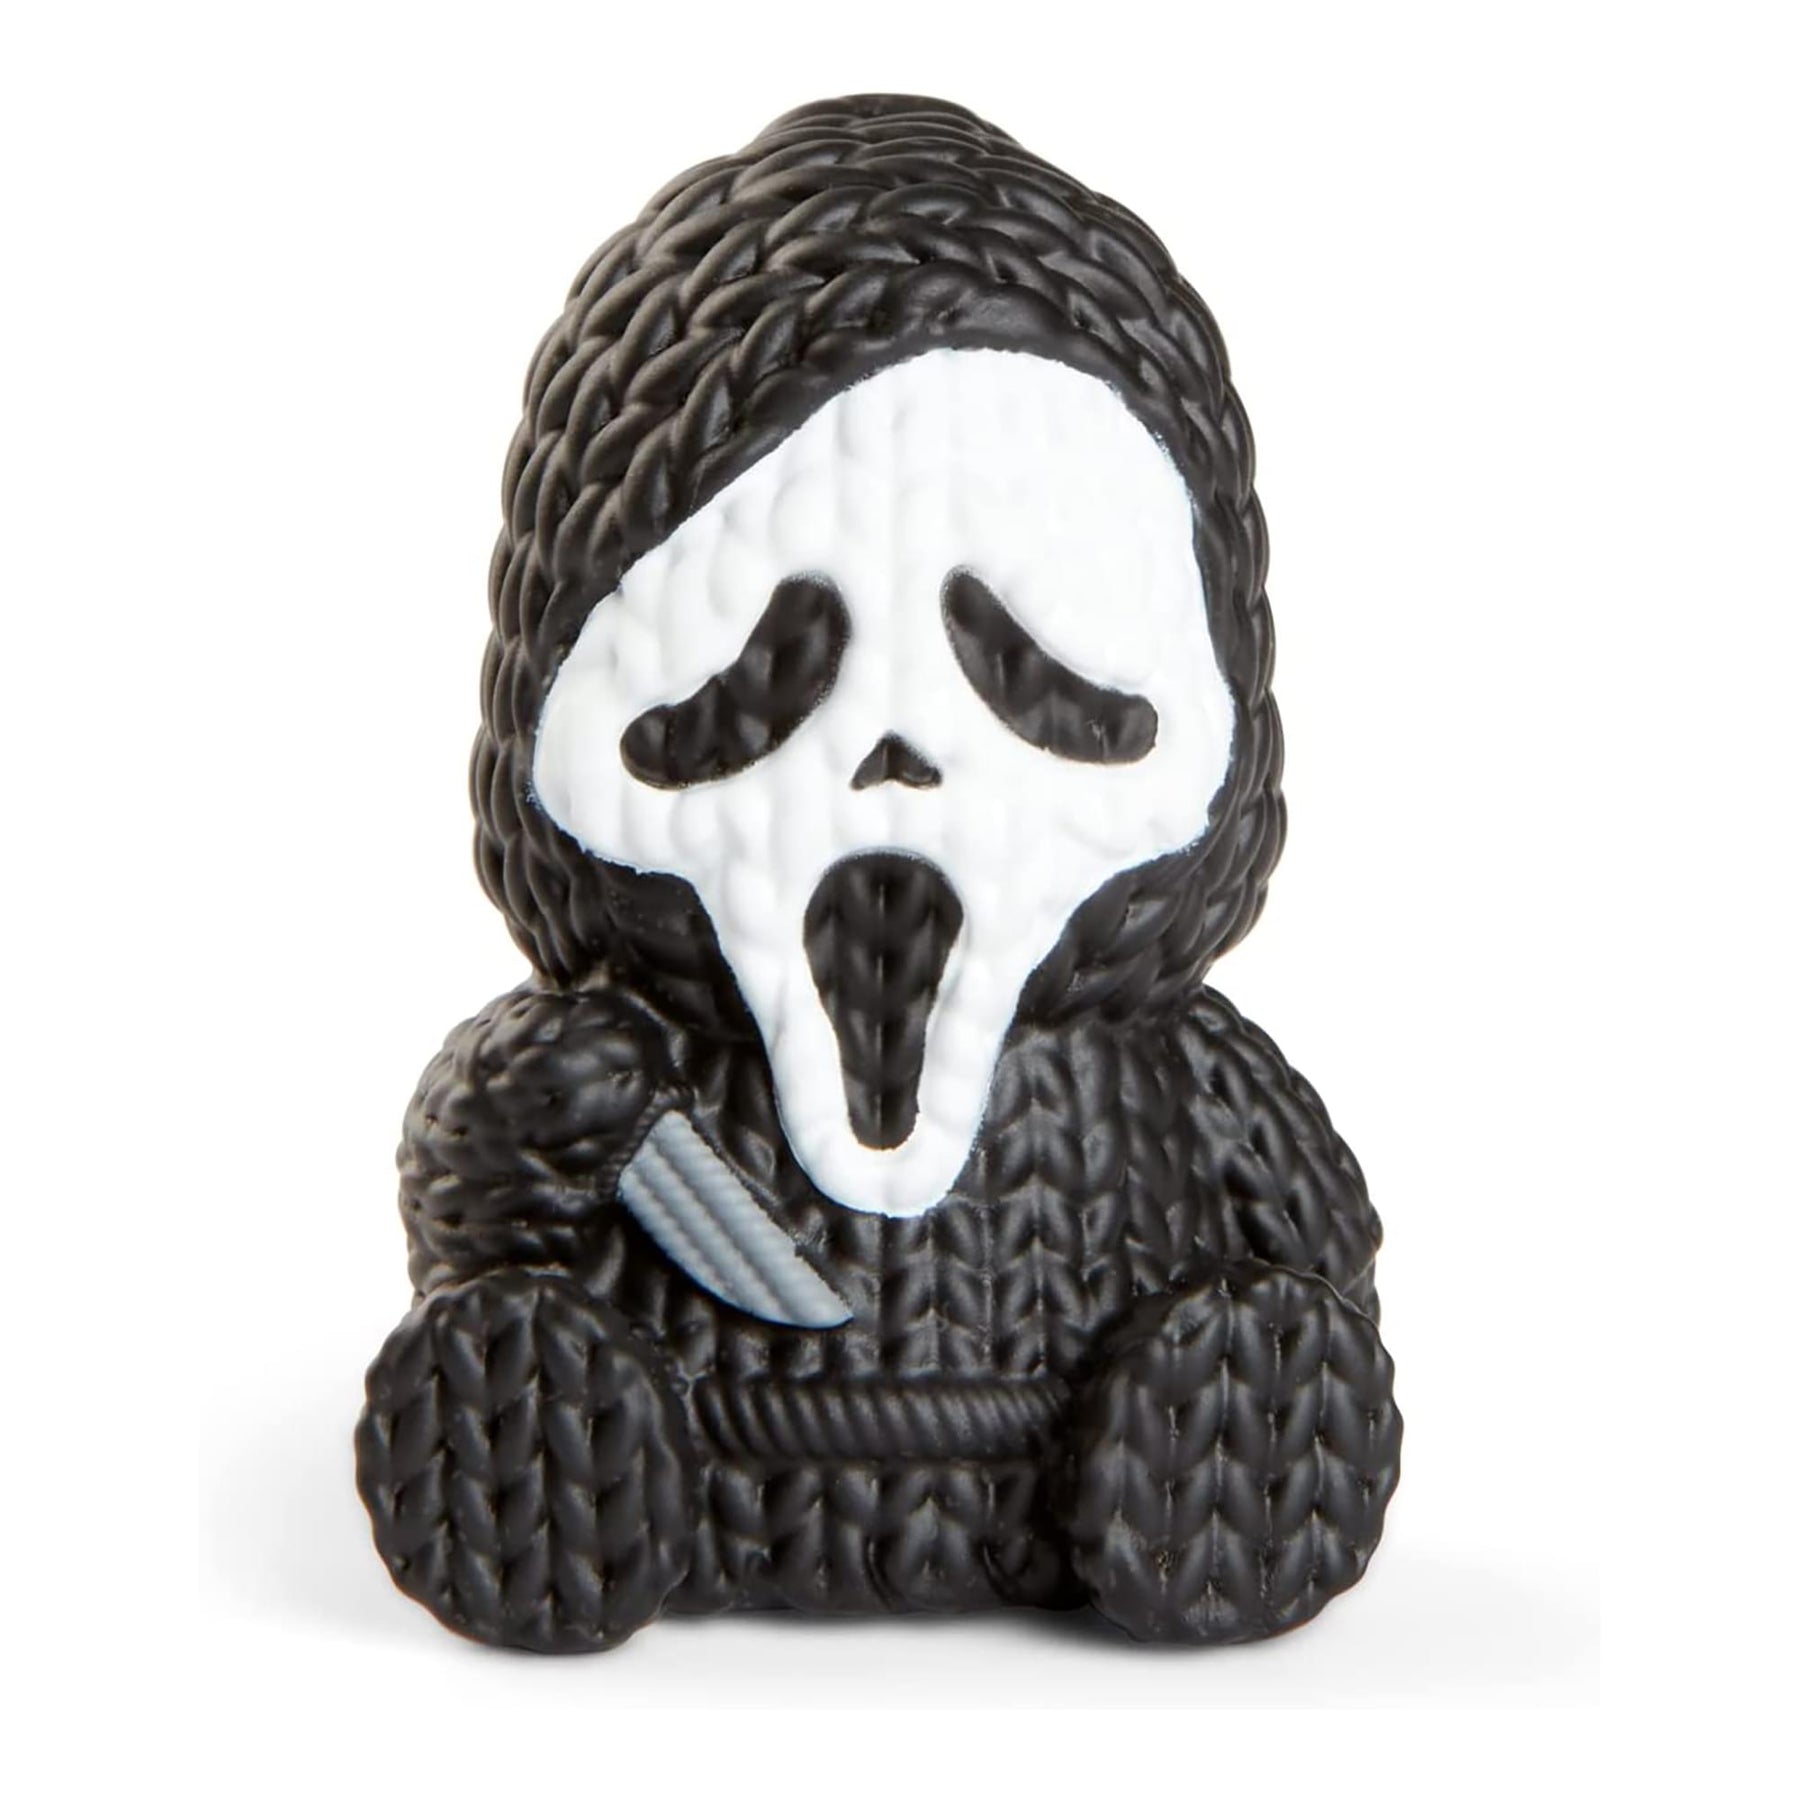 Scream Handmade by Robots 1.75 Inch Micro Vinyl Figure | Ghost Face White Face